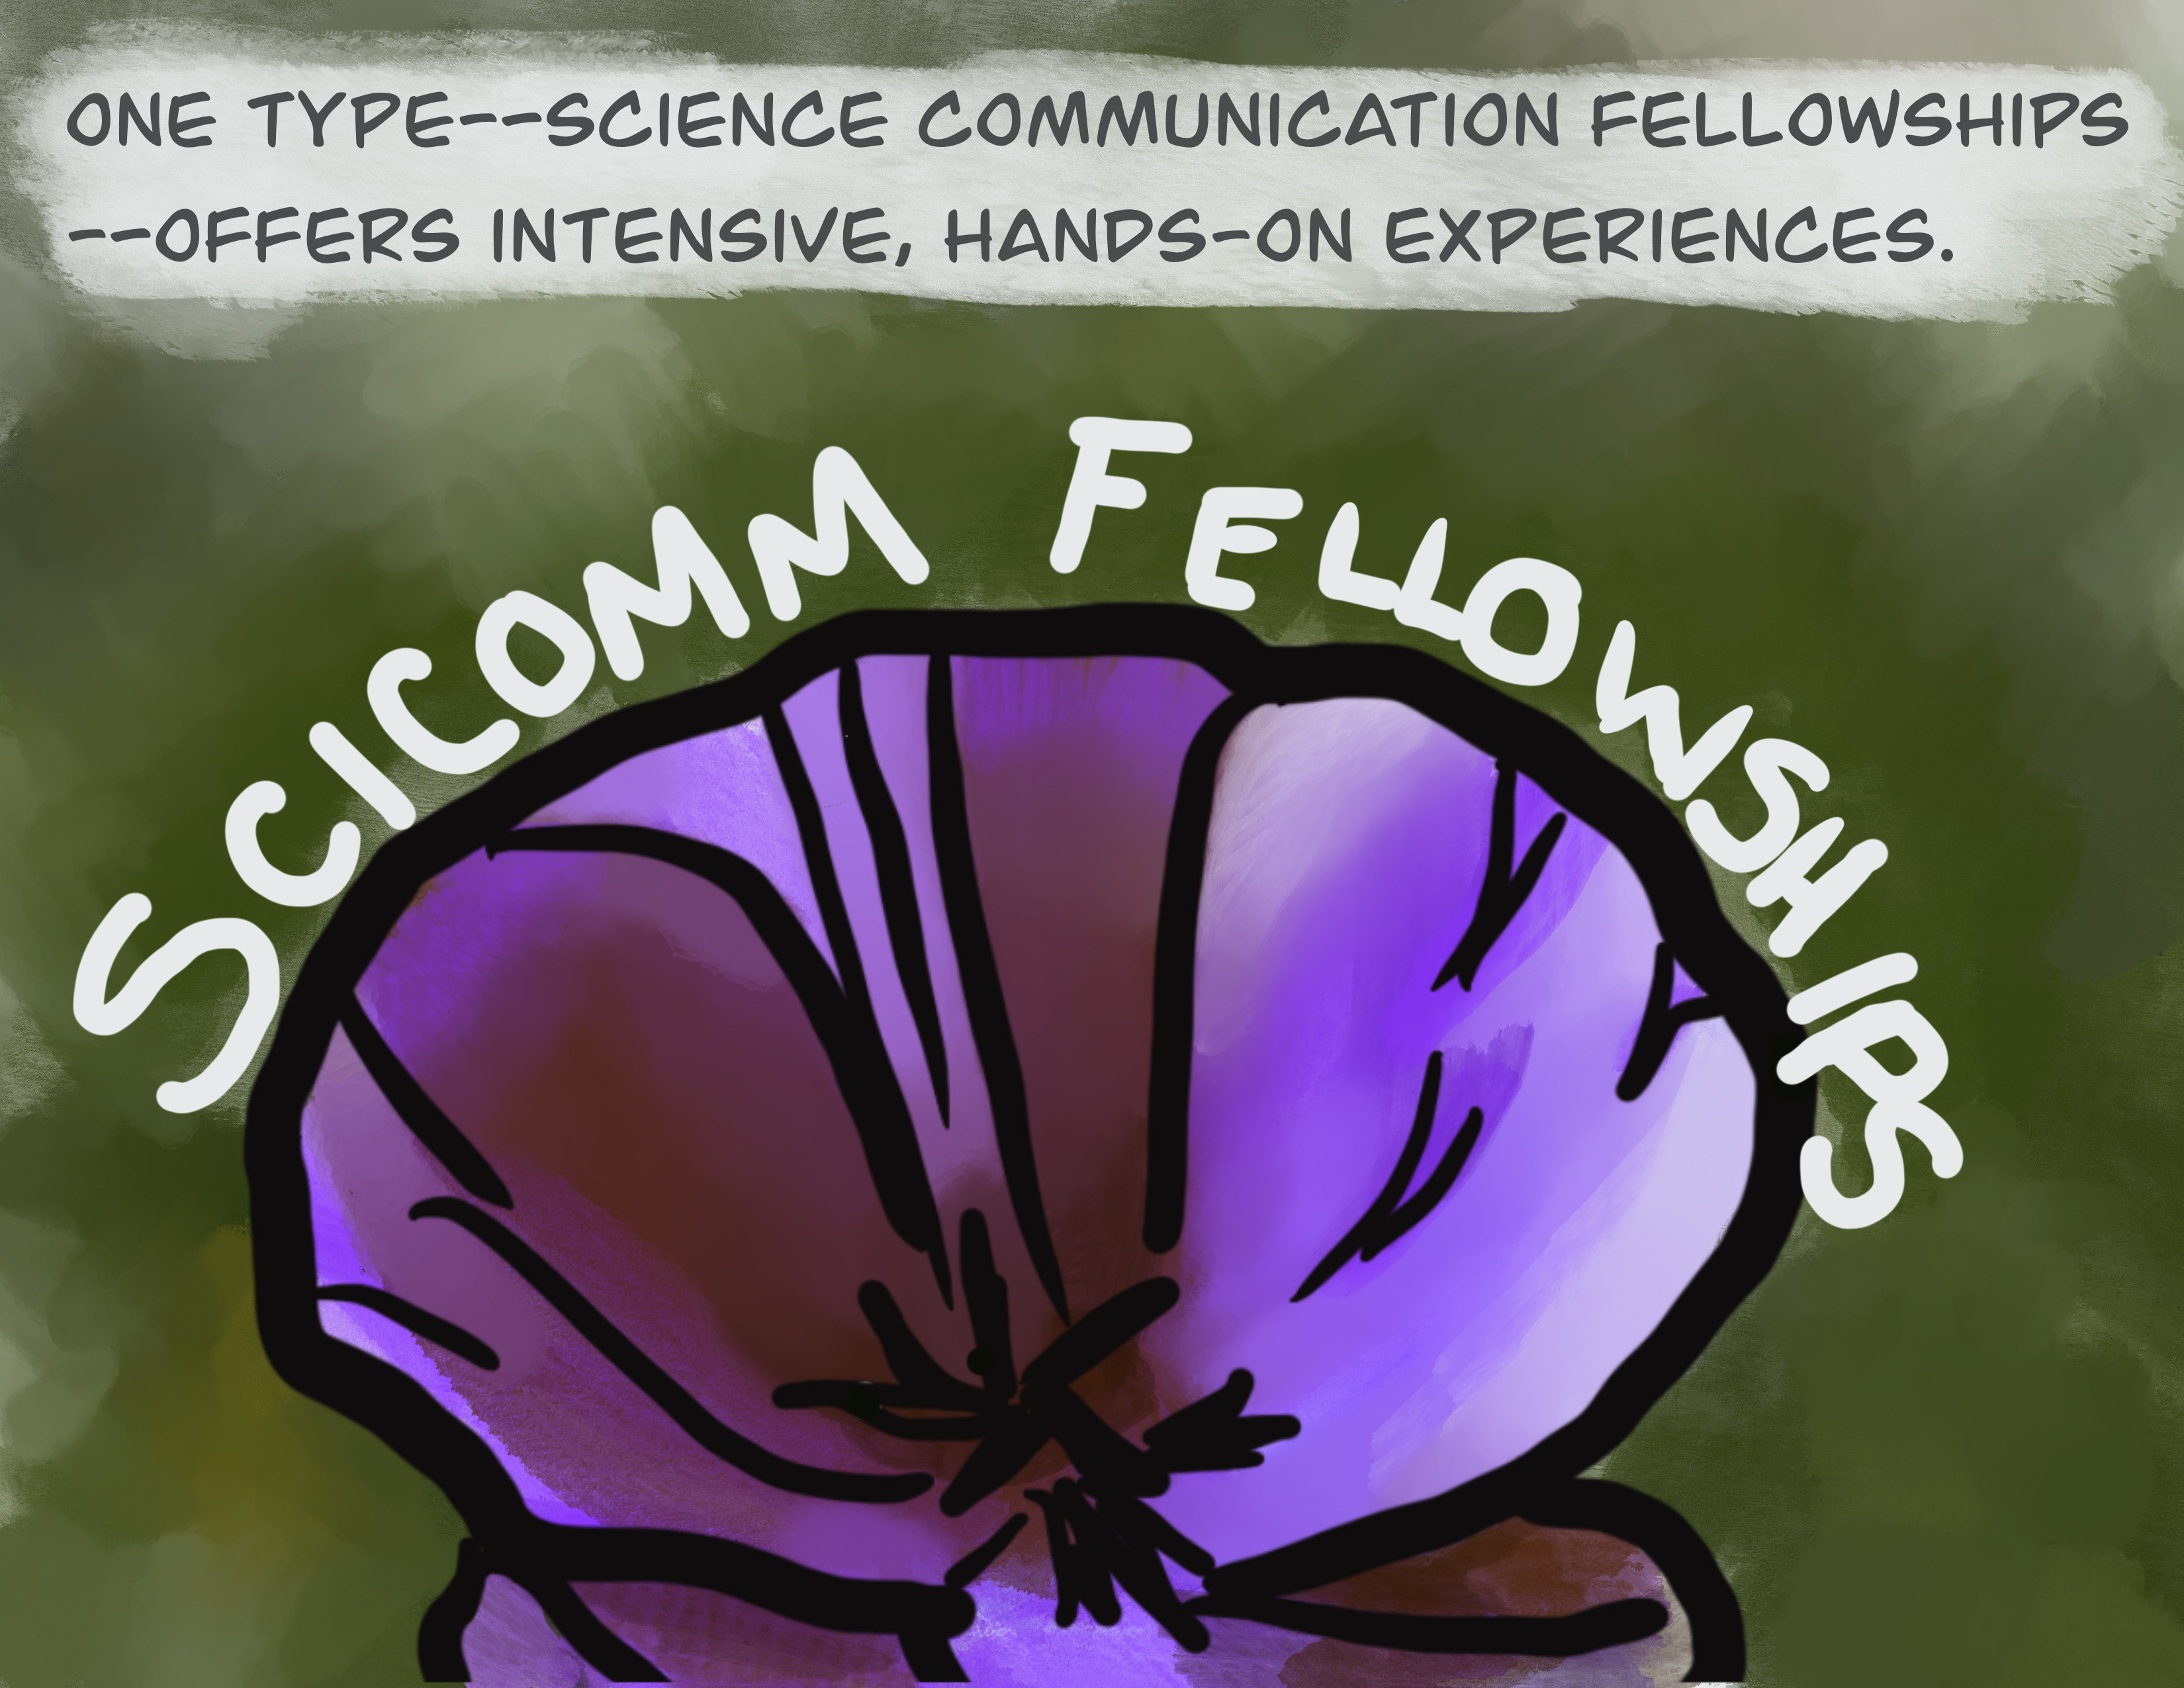 One type - science communication fellowships - offers intensive, hands-on experiences.